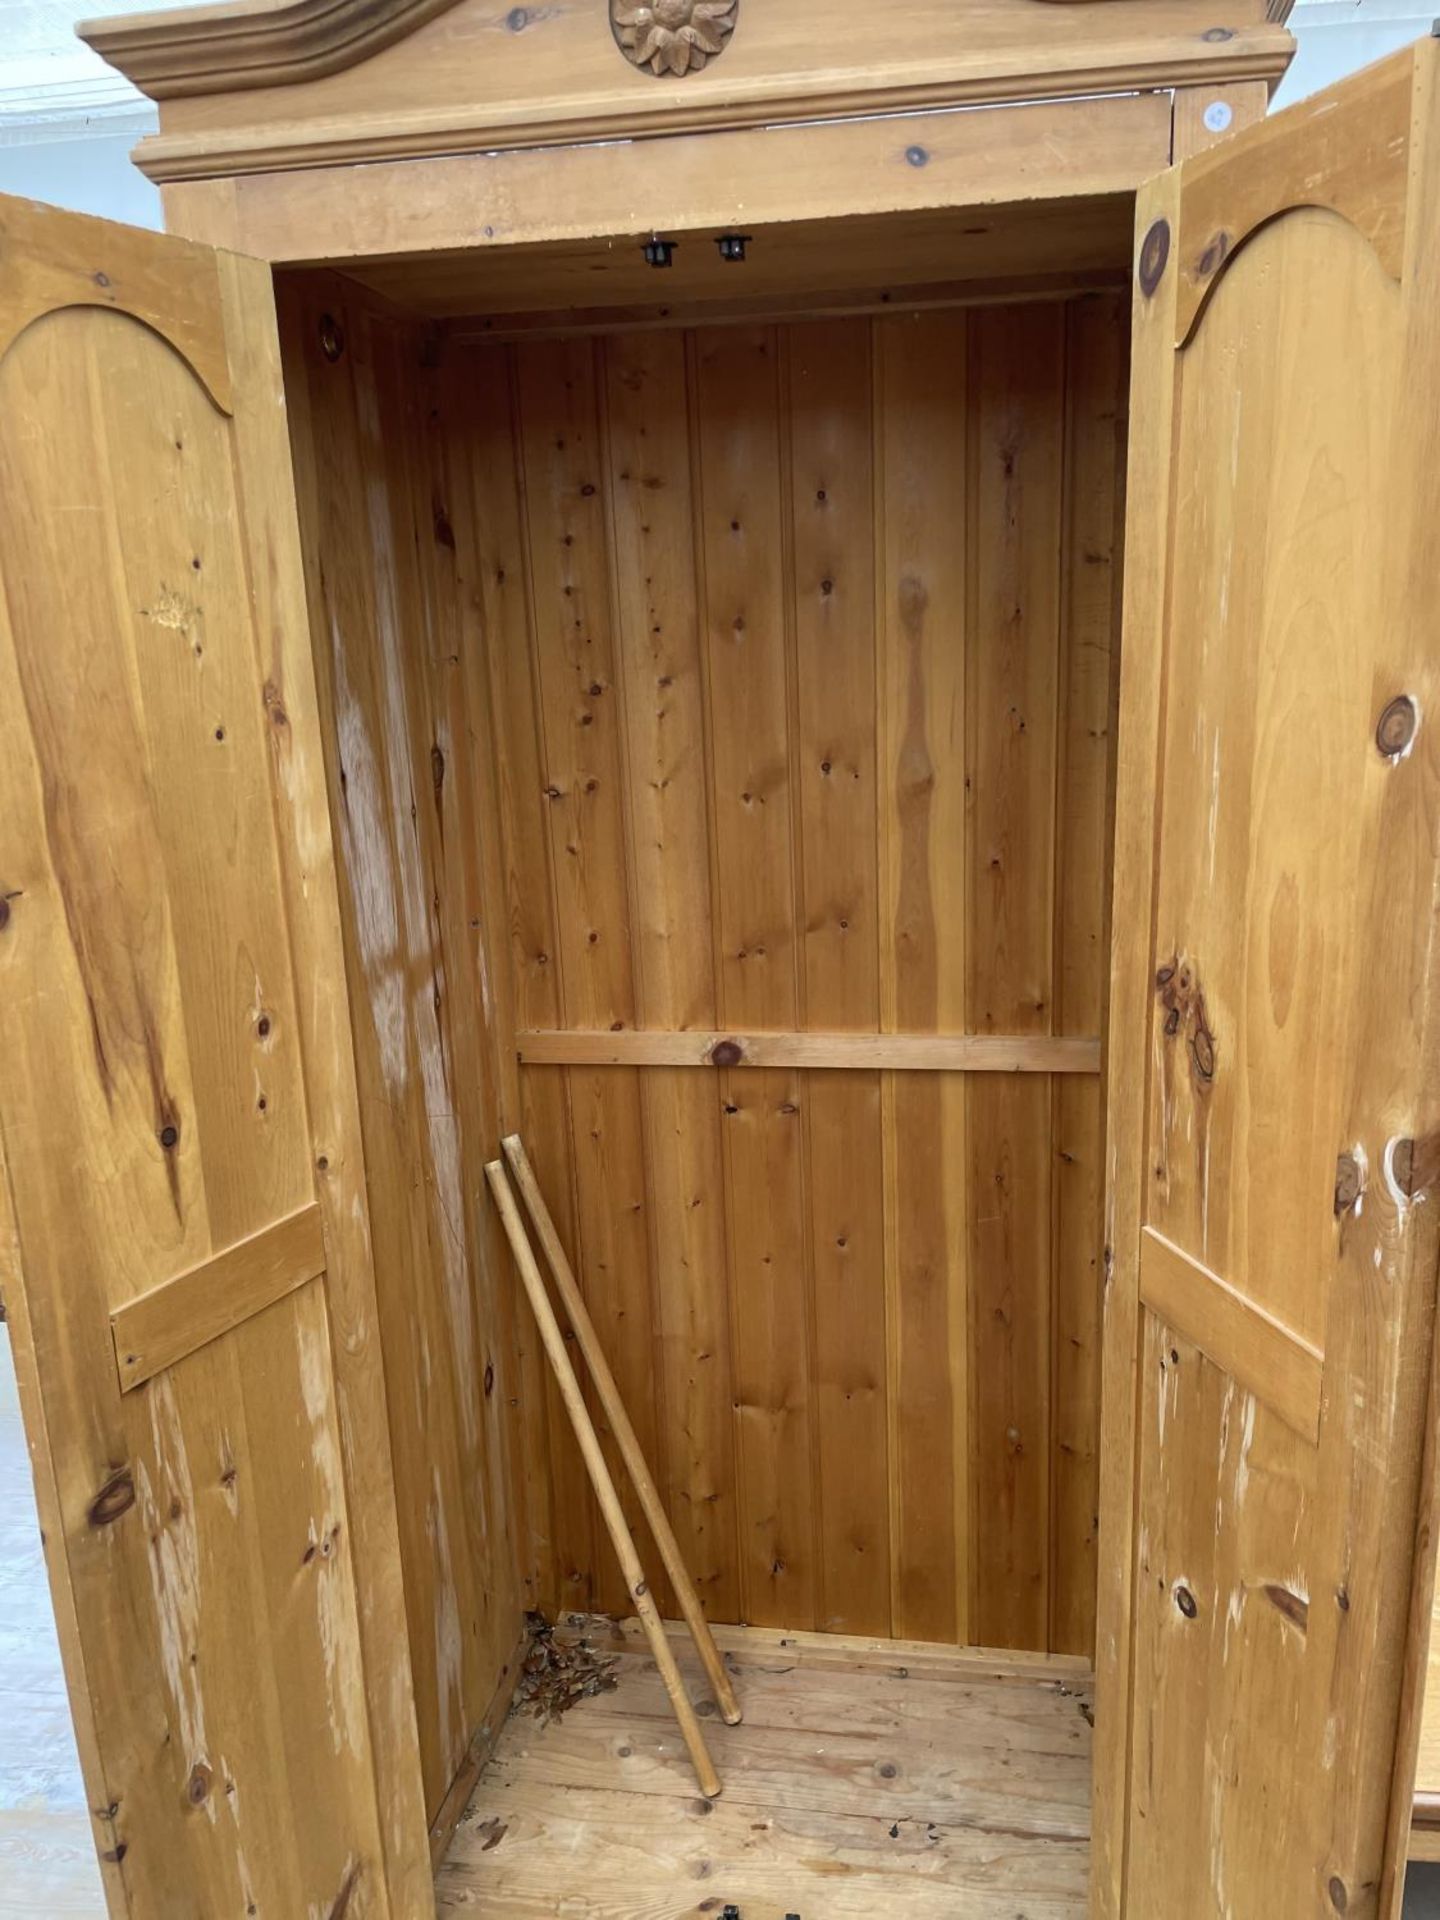 A PINE WARDROBE WITH TWO DOORS - Image 4 of 4